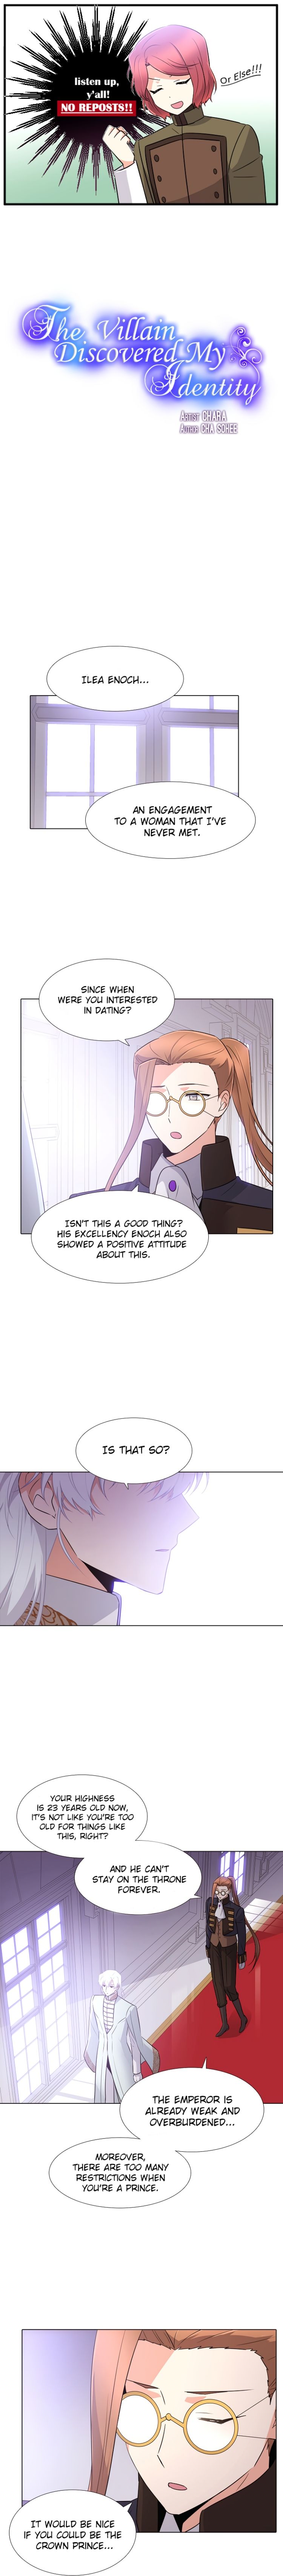 The Villain Discovered My Identity - Chapter 8 Page 1